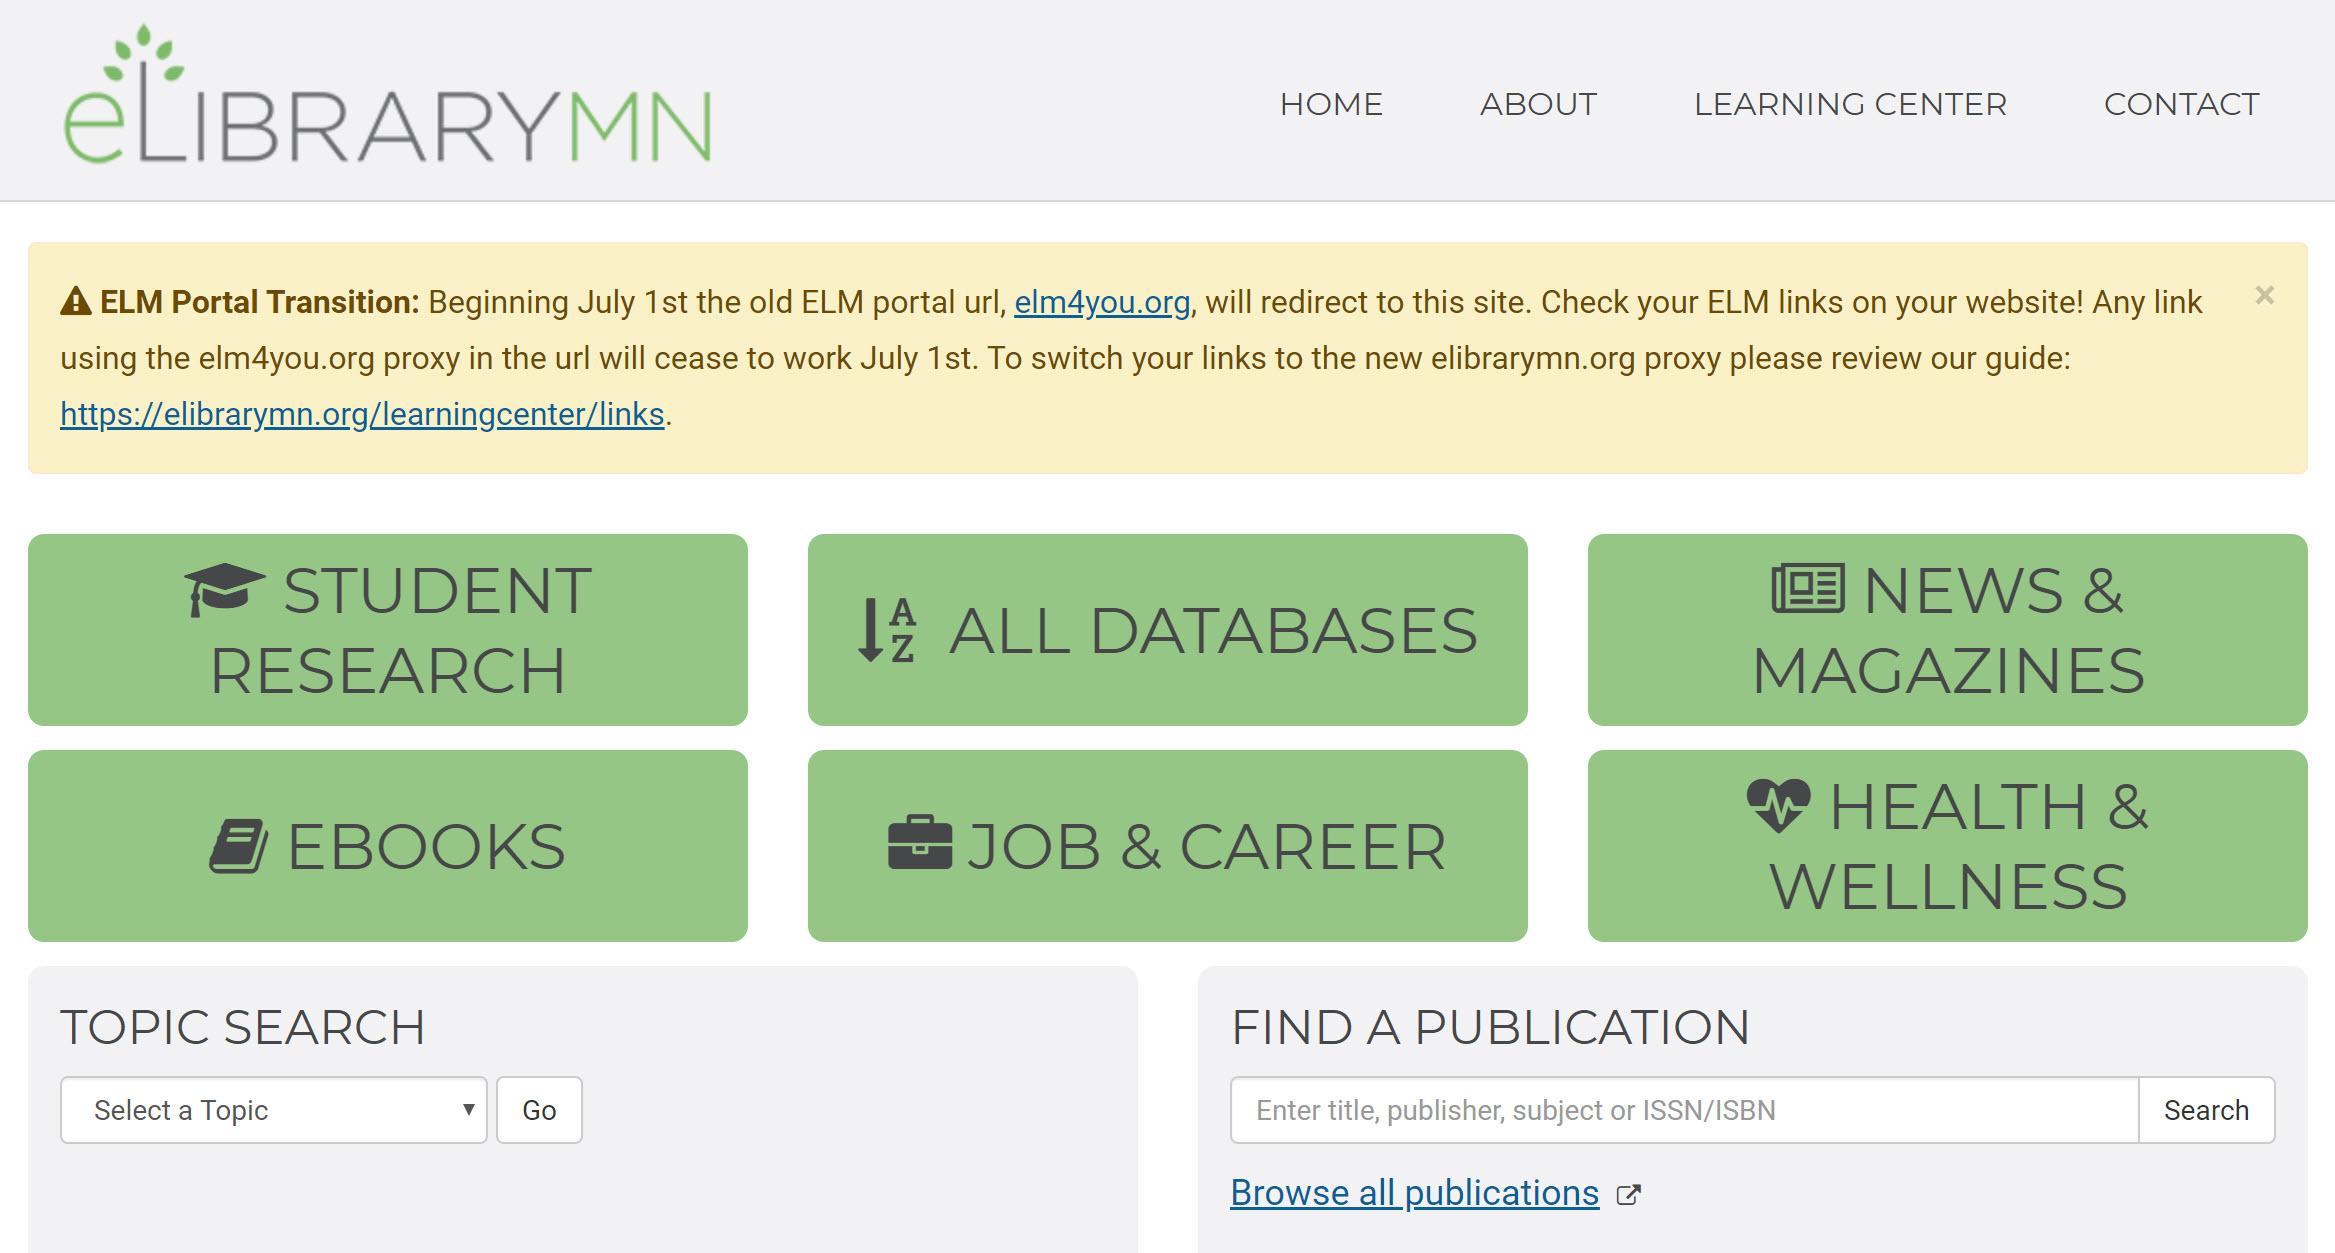 ELM 4 you webpage with Elibrarymn new logo and different green research buttons